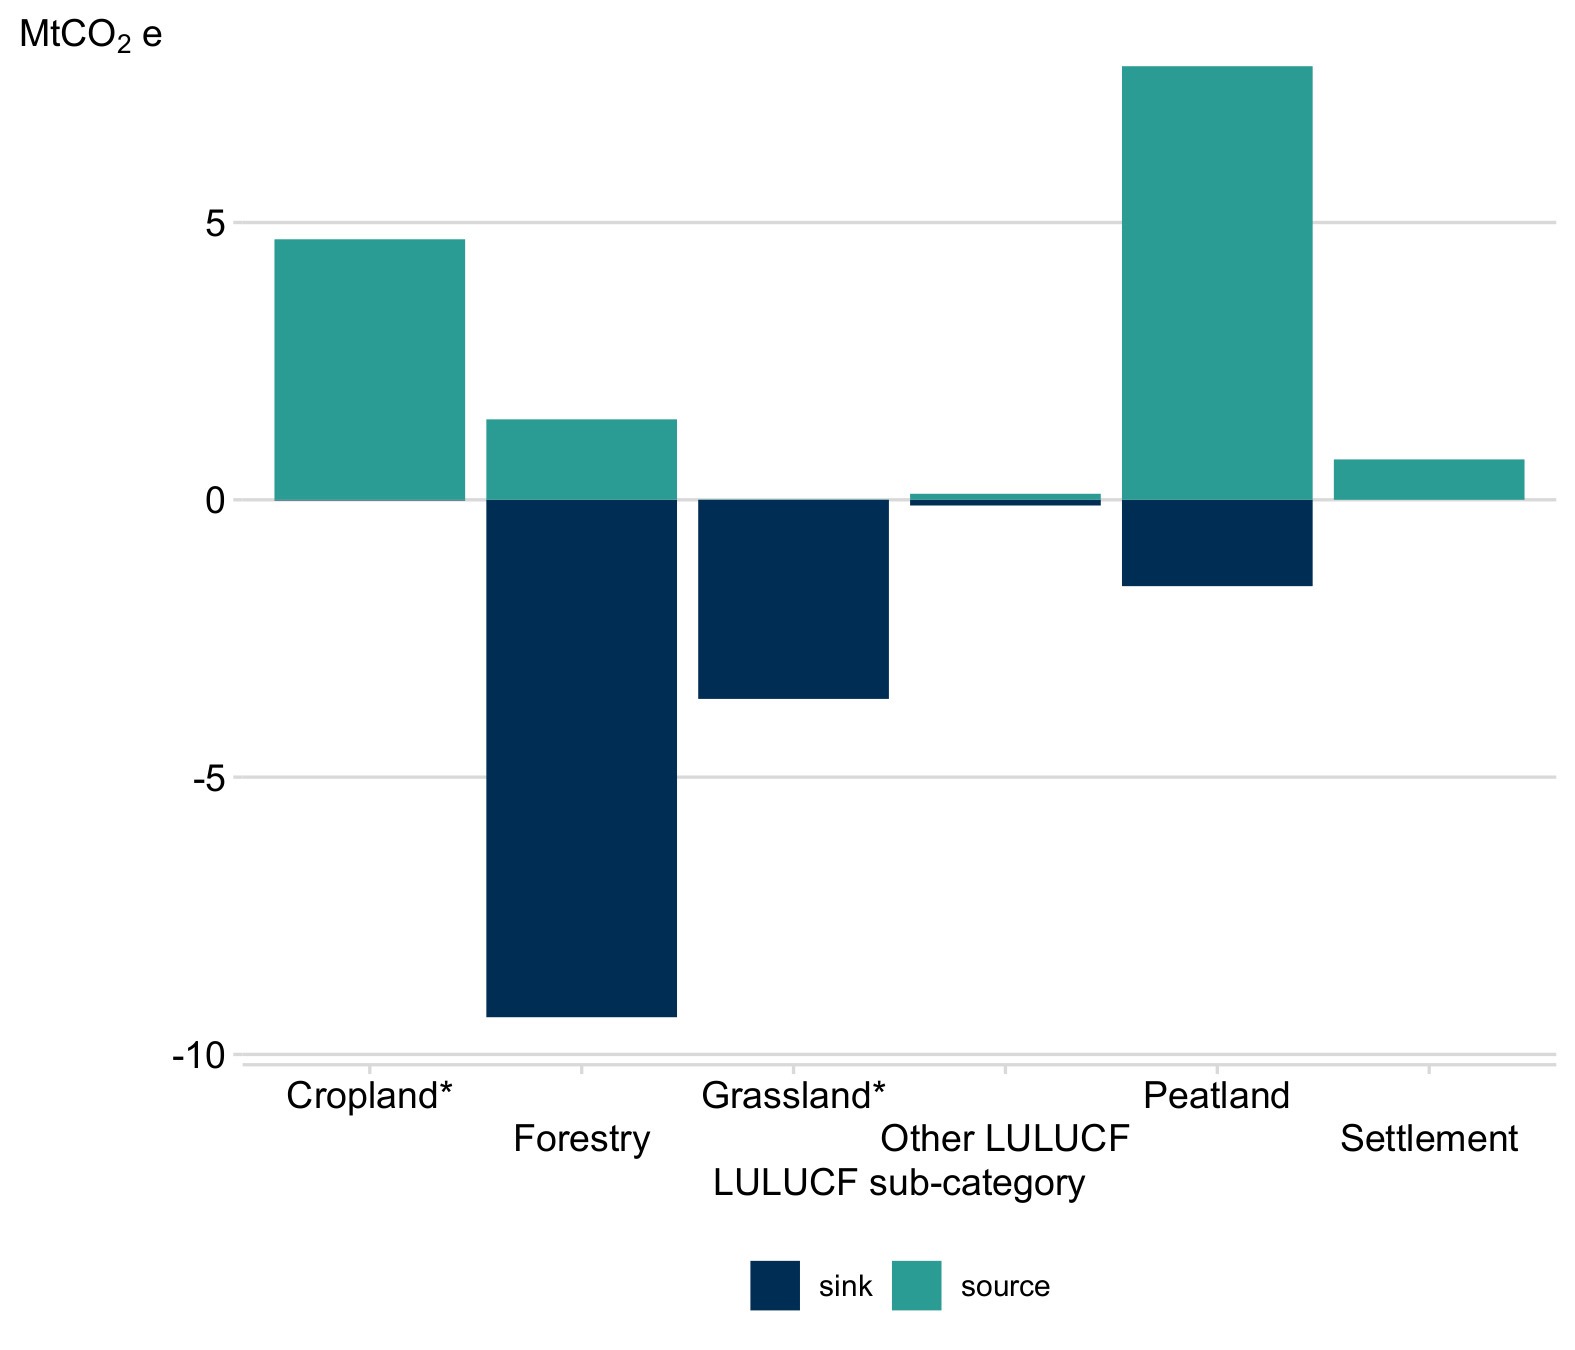 A graph showing sources and sinks of greenhouse gas emissions in Land Use, Land Use Change and Forestry in Scotland in 2022. In order, the largest sources are peatland, cropland, forestry, settlement and finally other land use, land use change and forestry. The largest sinks are forestry, grassland, peatland and finally other land use, land use change and forestry.